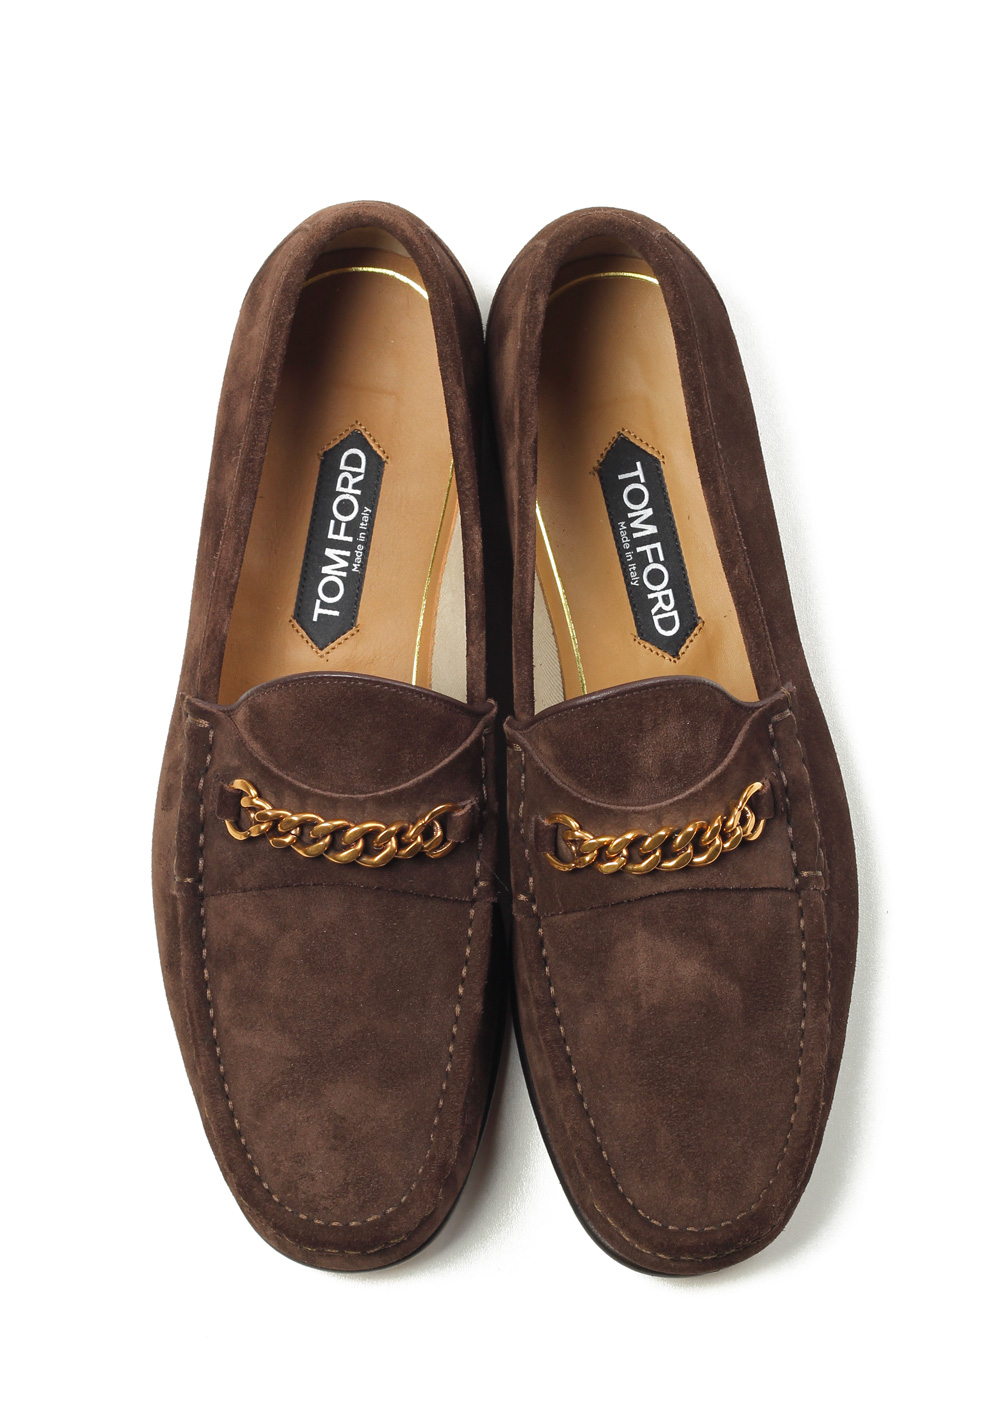 TOM FORD York Brown Suede Chain Loafers Shoes Size 10 UK / 11 U.S. | Costume Limité